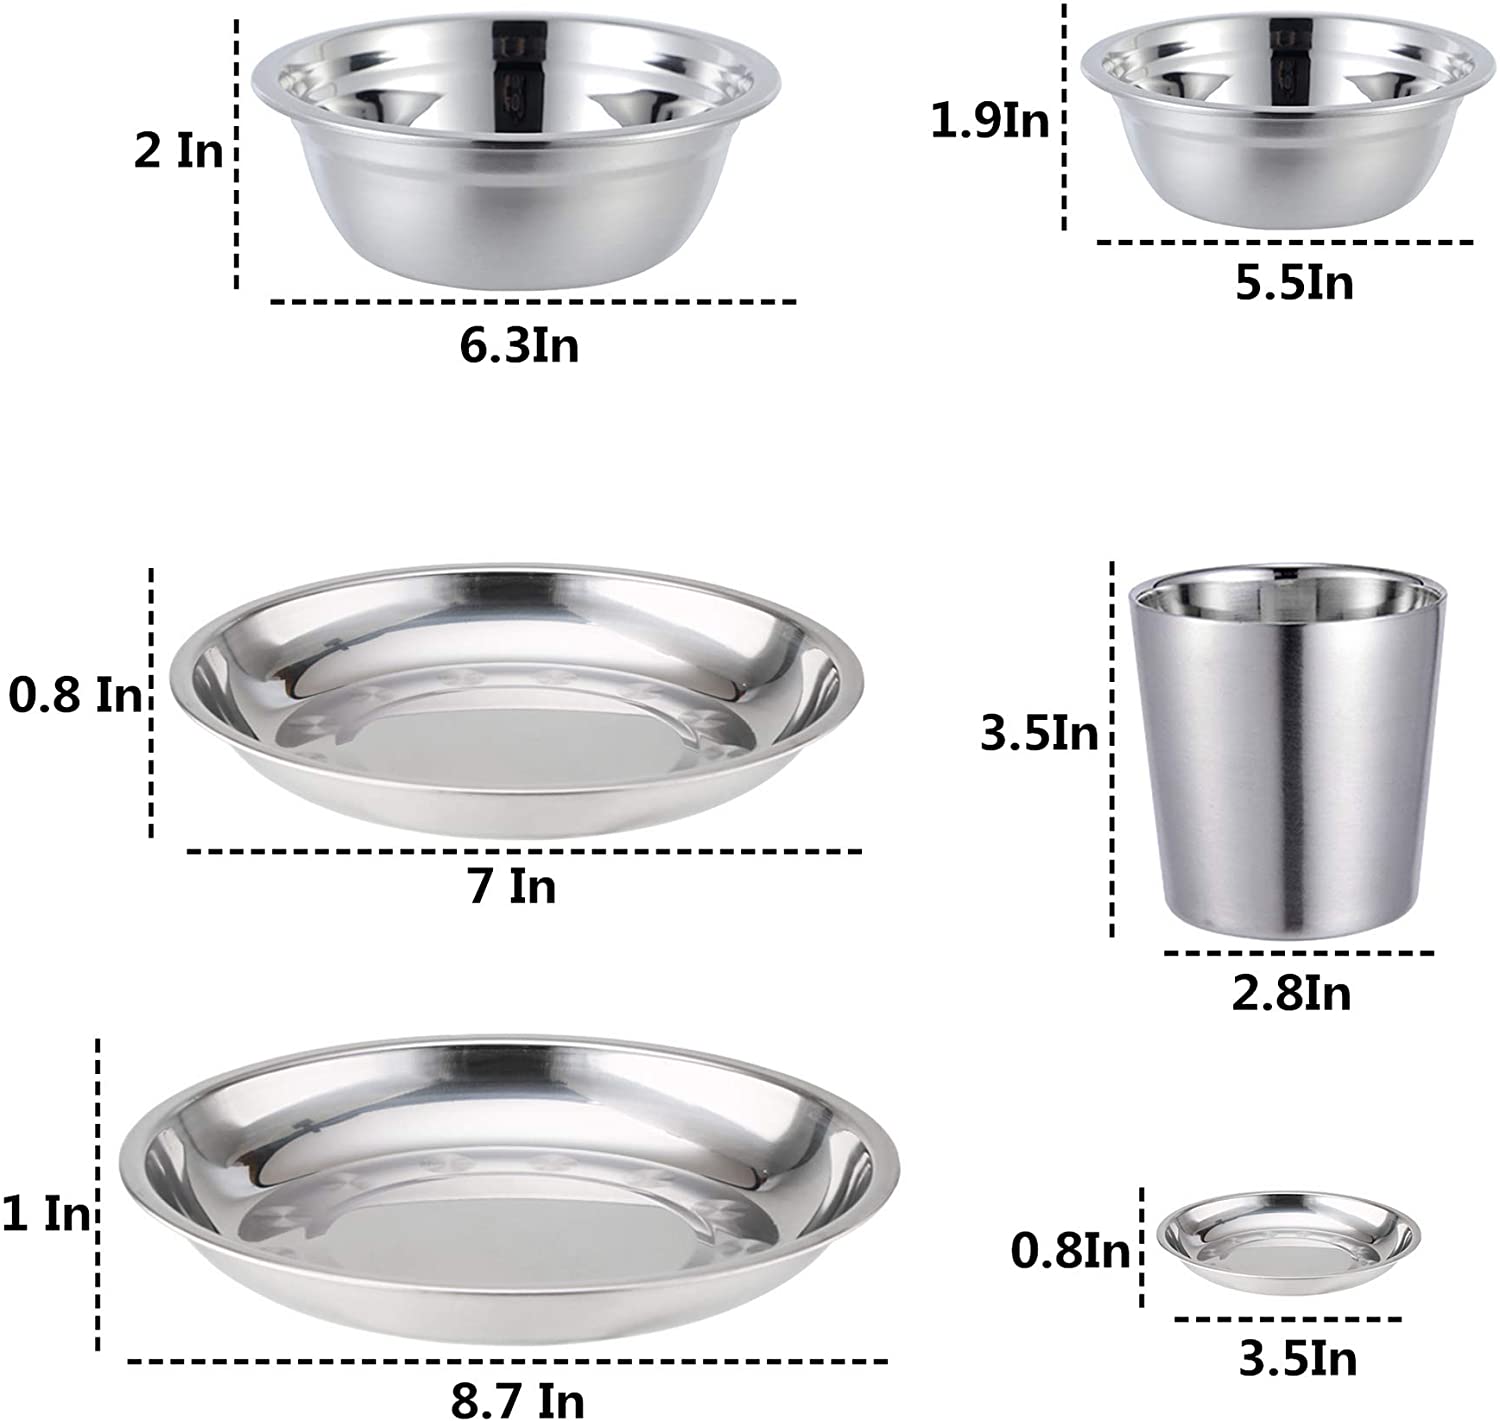 、Cups　、Bowls　Plates　to　8.6inch.　Stainless　Use　Set　Steel　(24-Piece　Dish.　Set)　Outdoor　and　3.5inch　Camping　Spice　Incl.